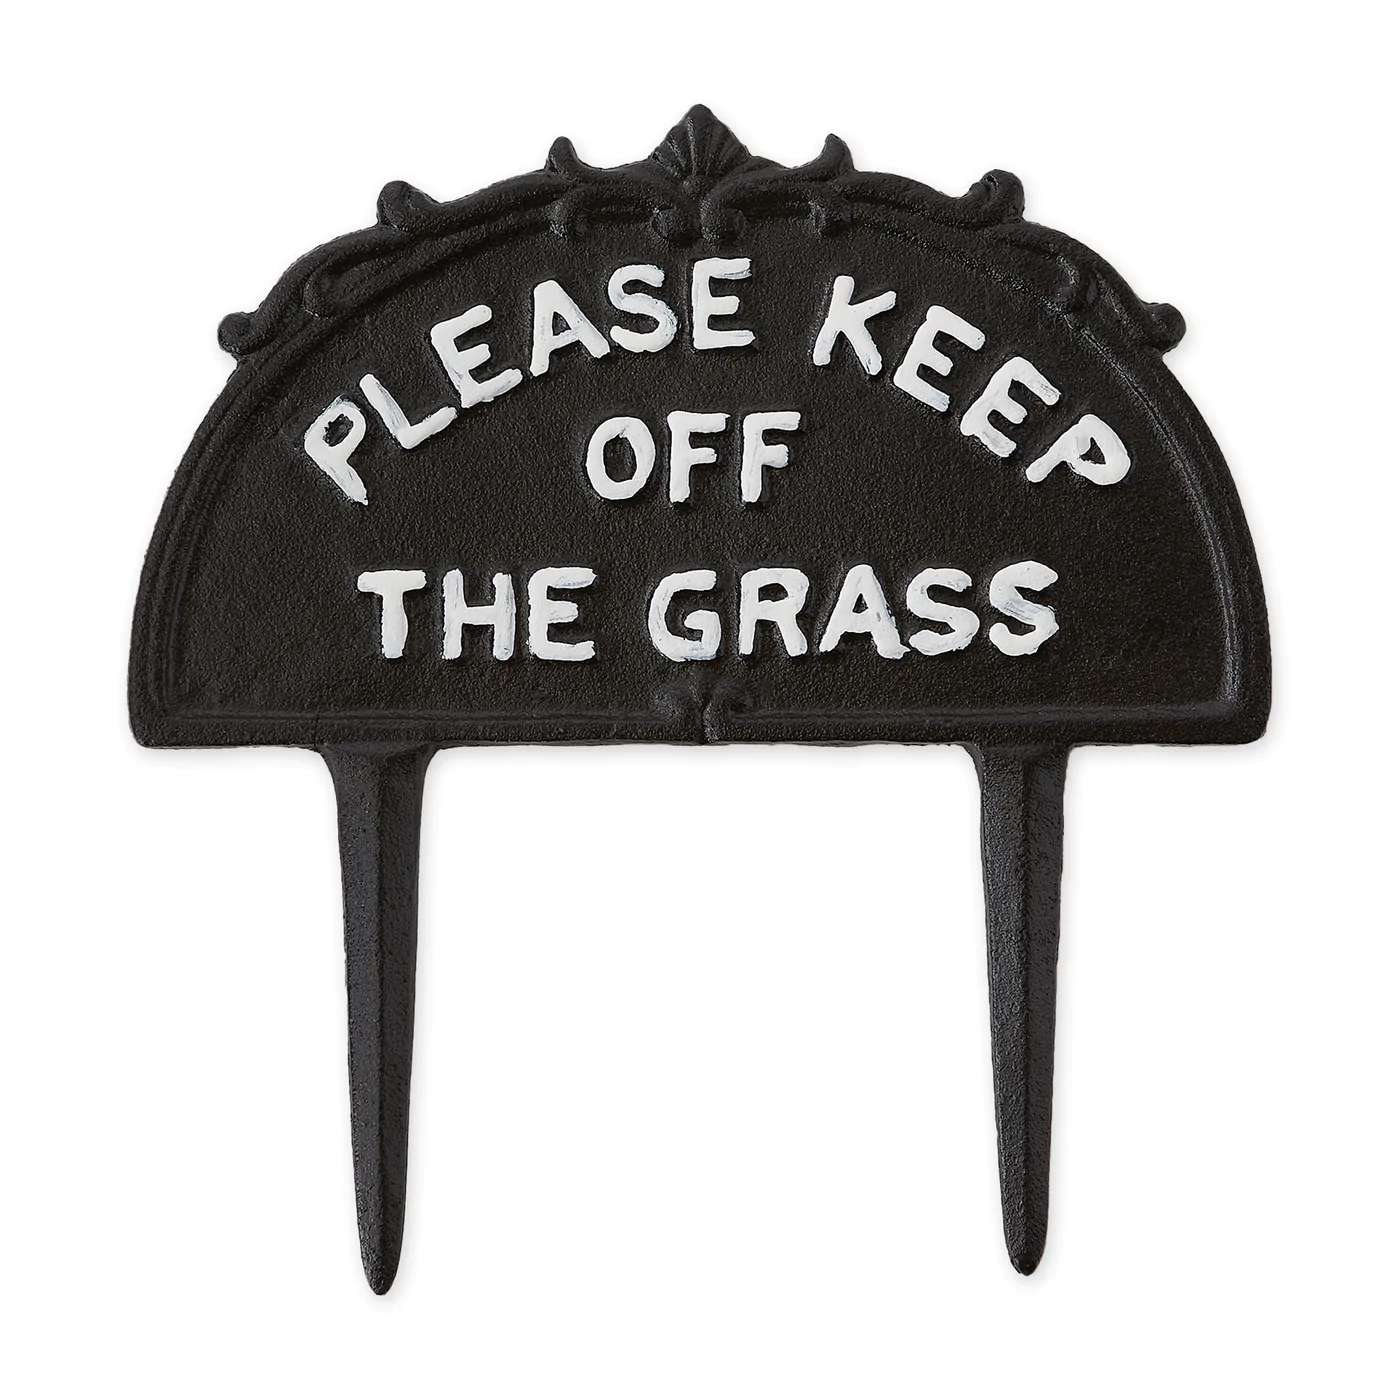 Please Keep Off the Grass Garden Stake - $26.27